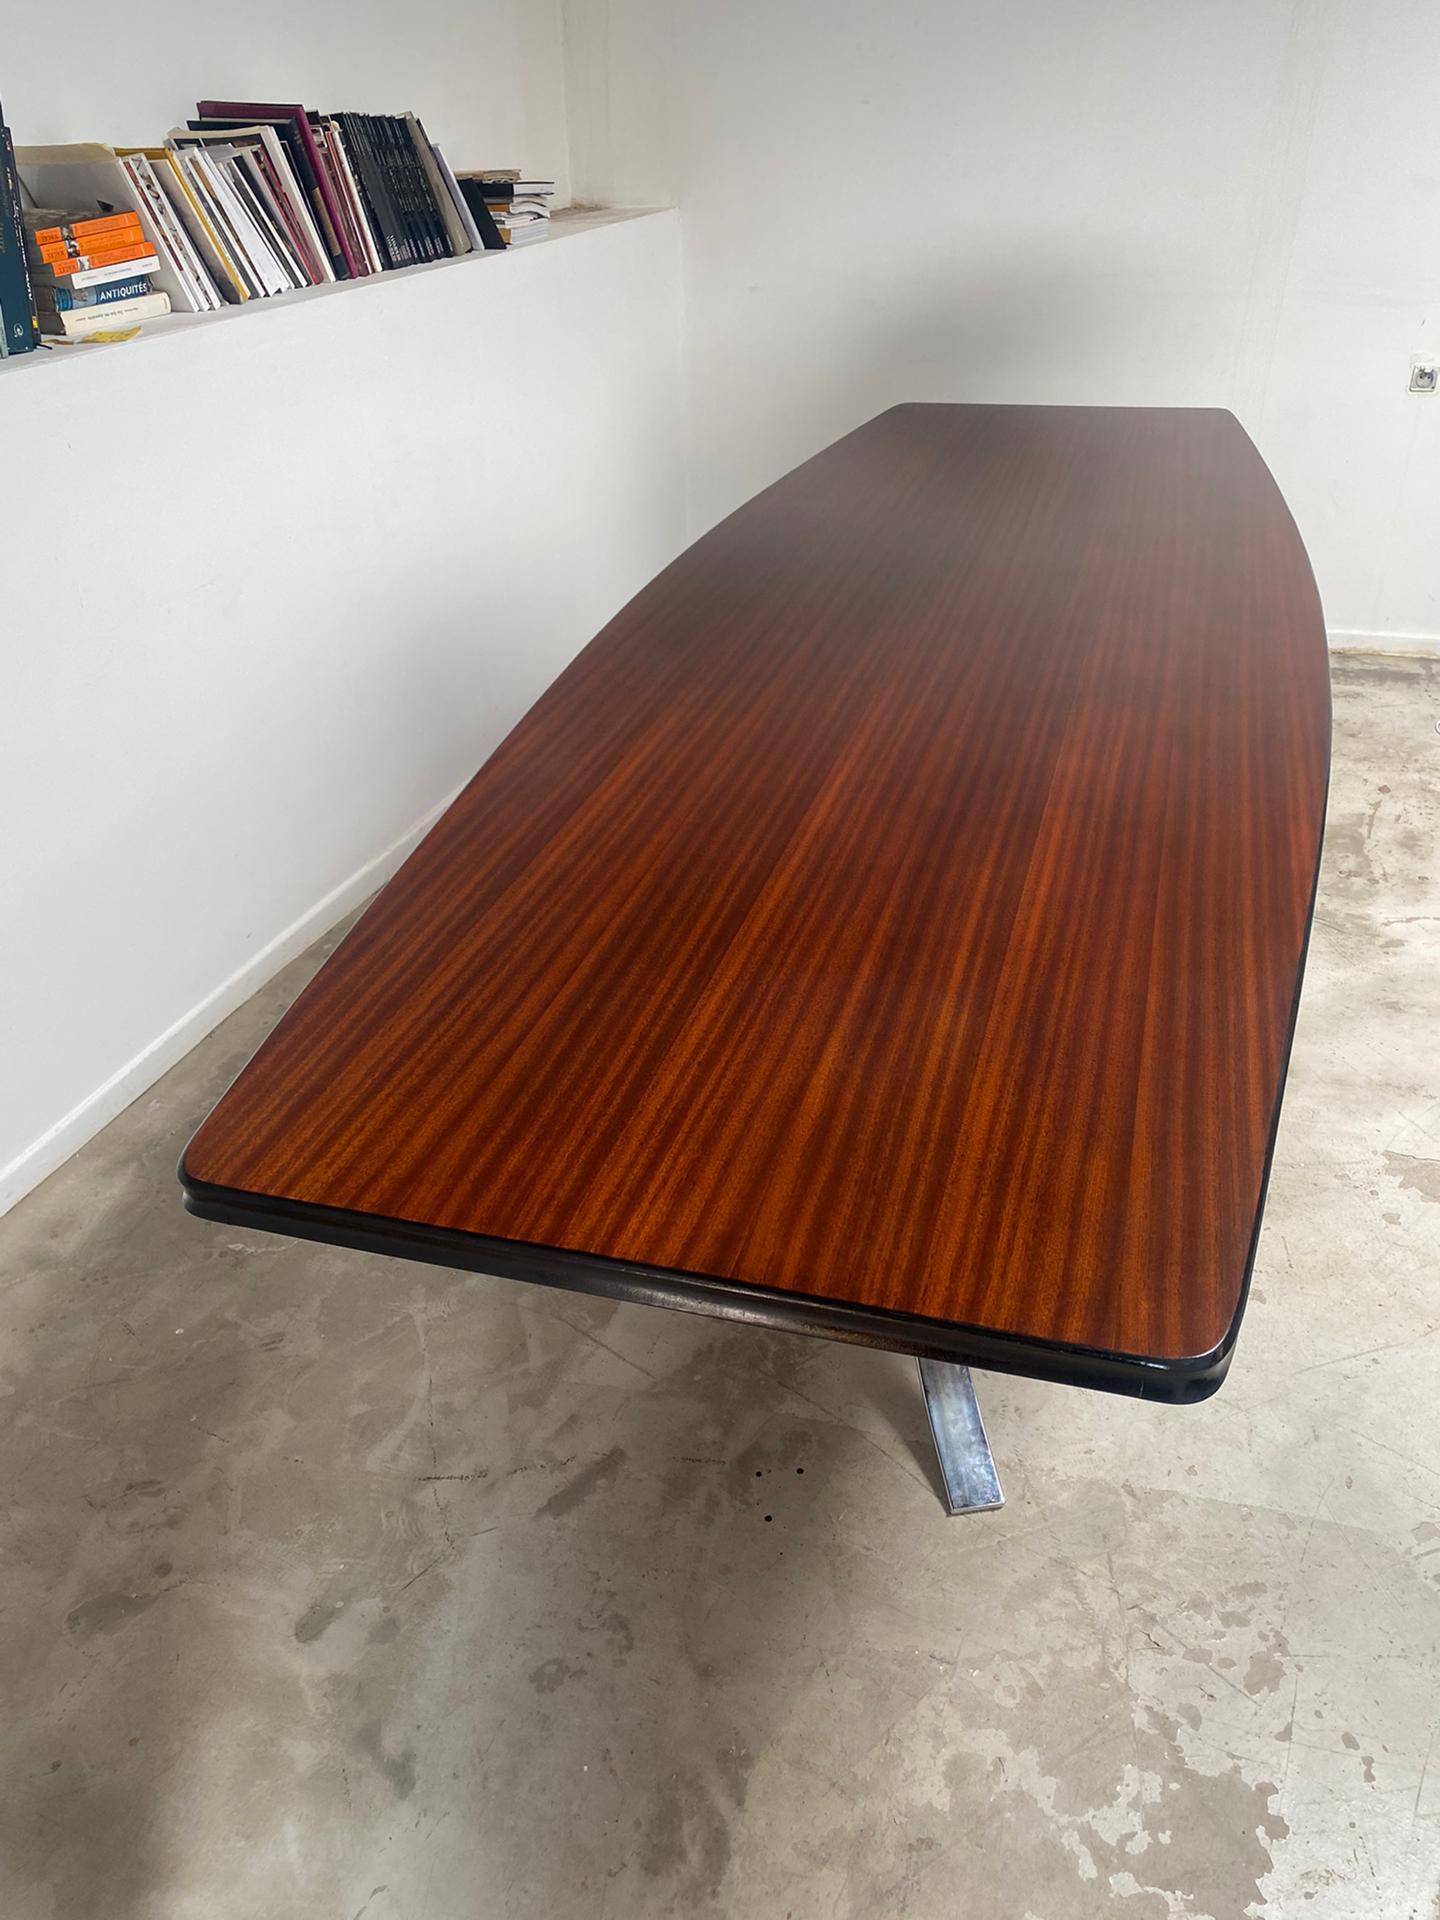 Late 20th Century Very Large Dining or Conference Table on Metallic Legs